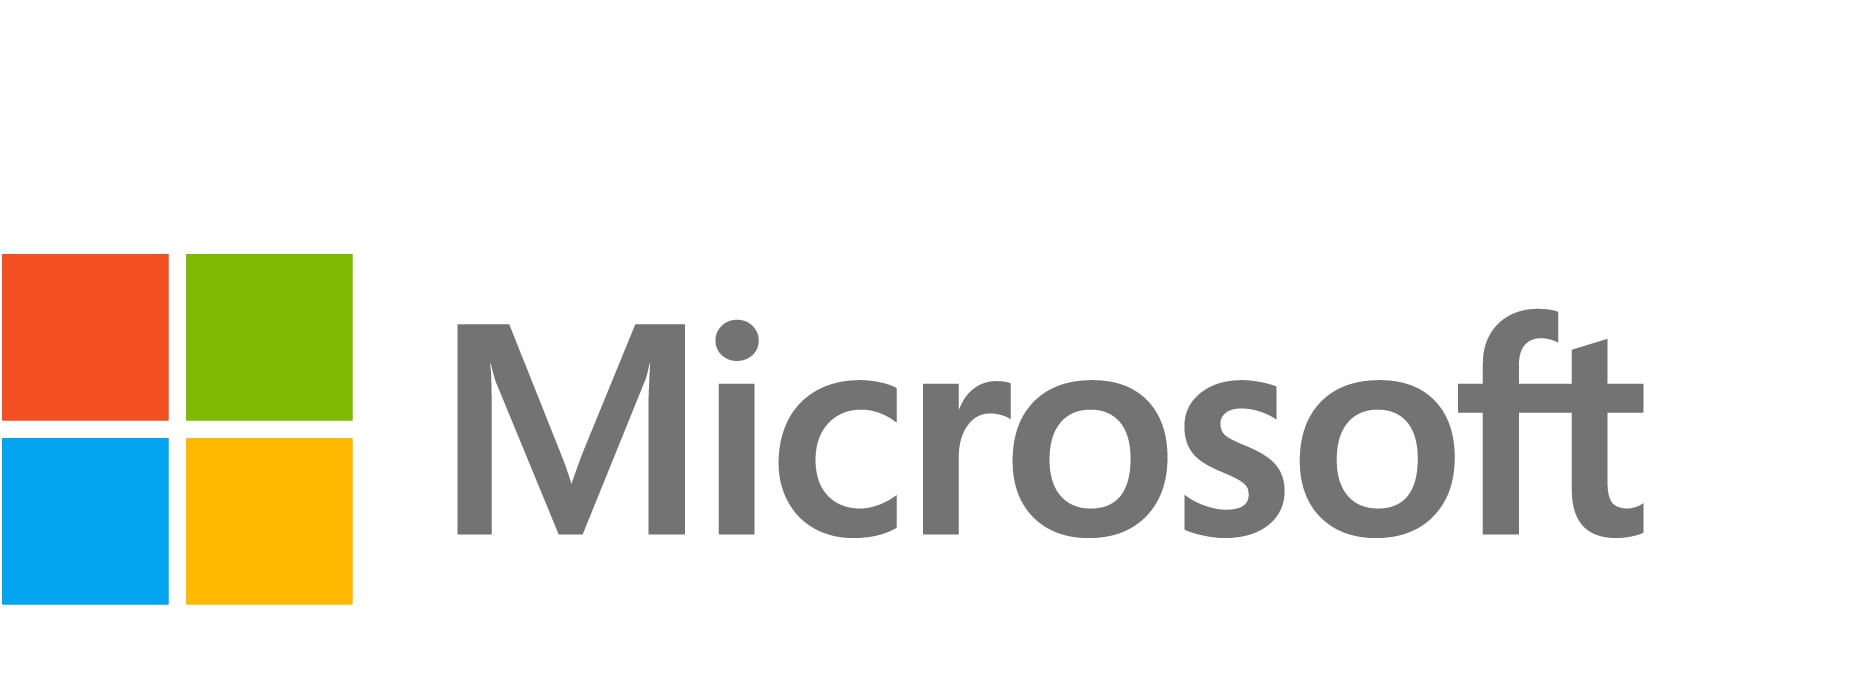 Microsoft Extended Hardware Service Plan - extended service agreement - 4 years - shipment